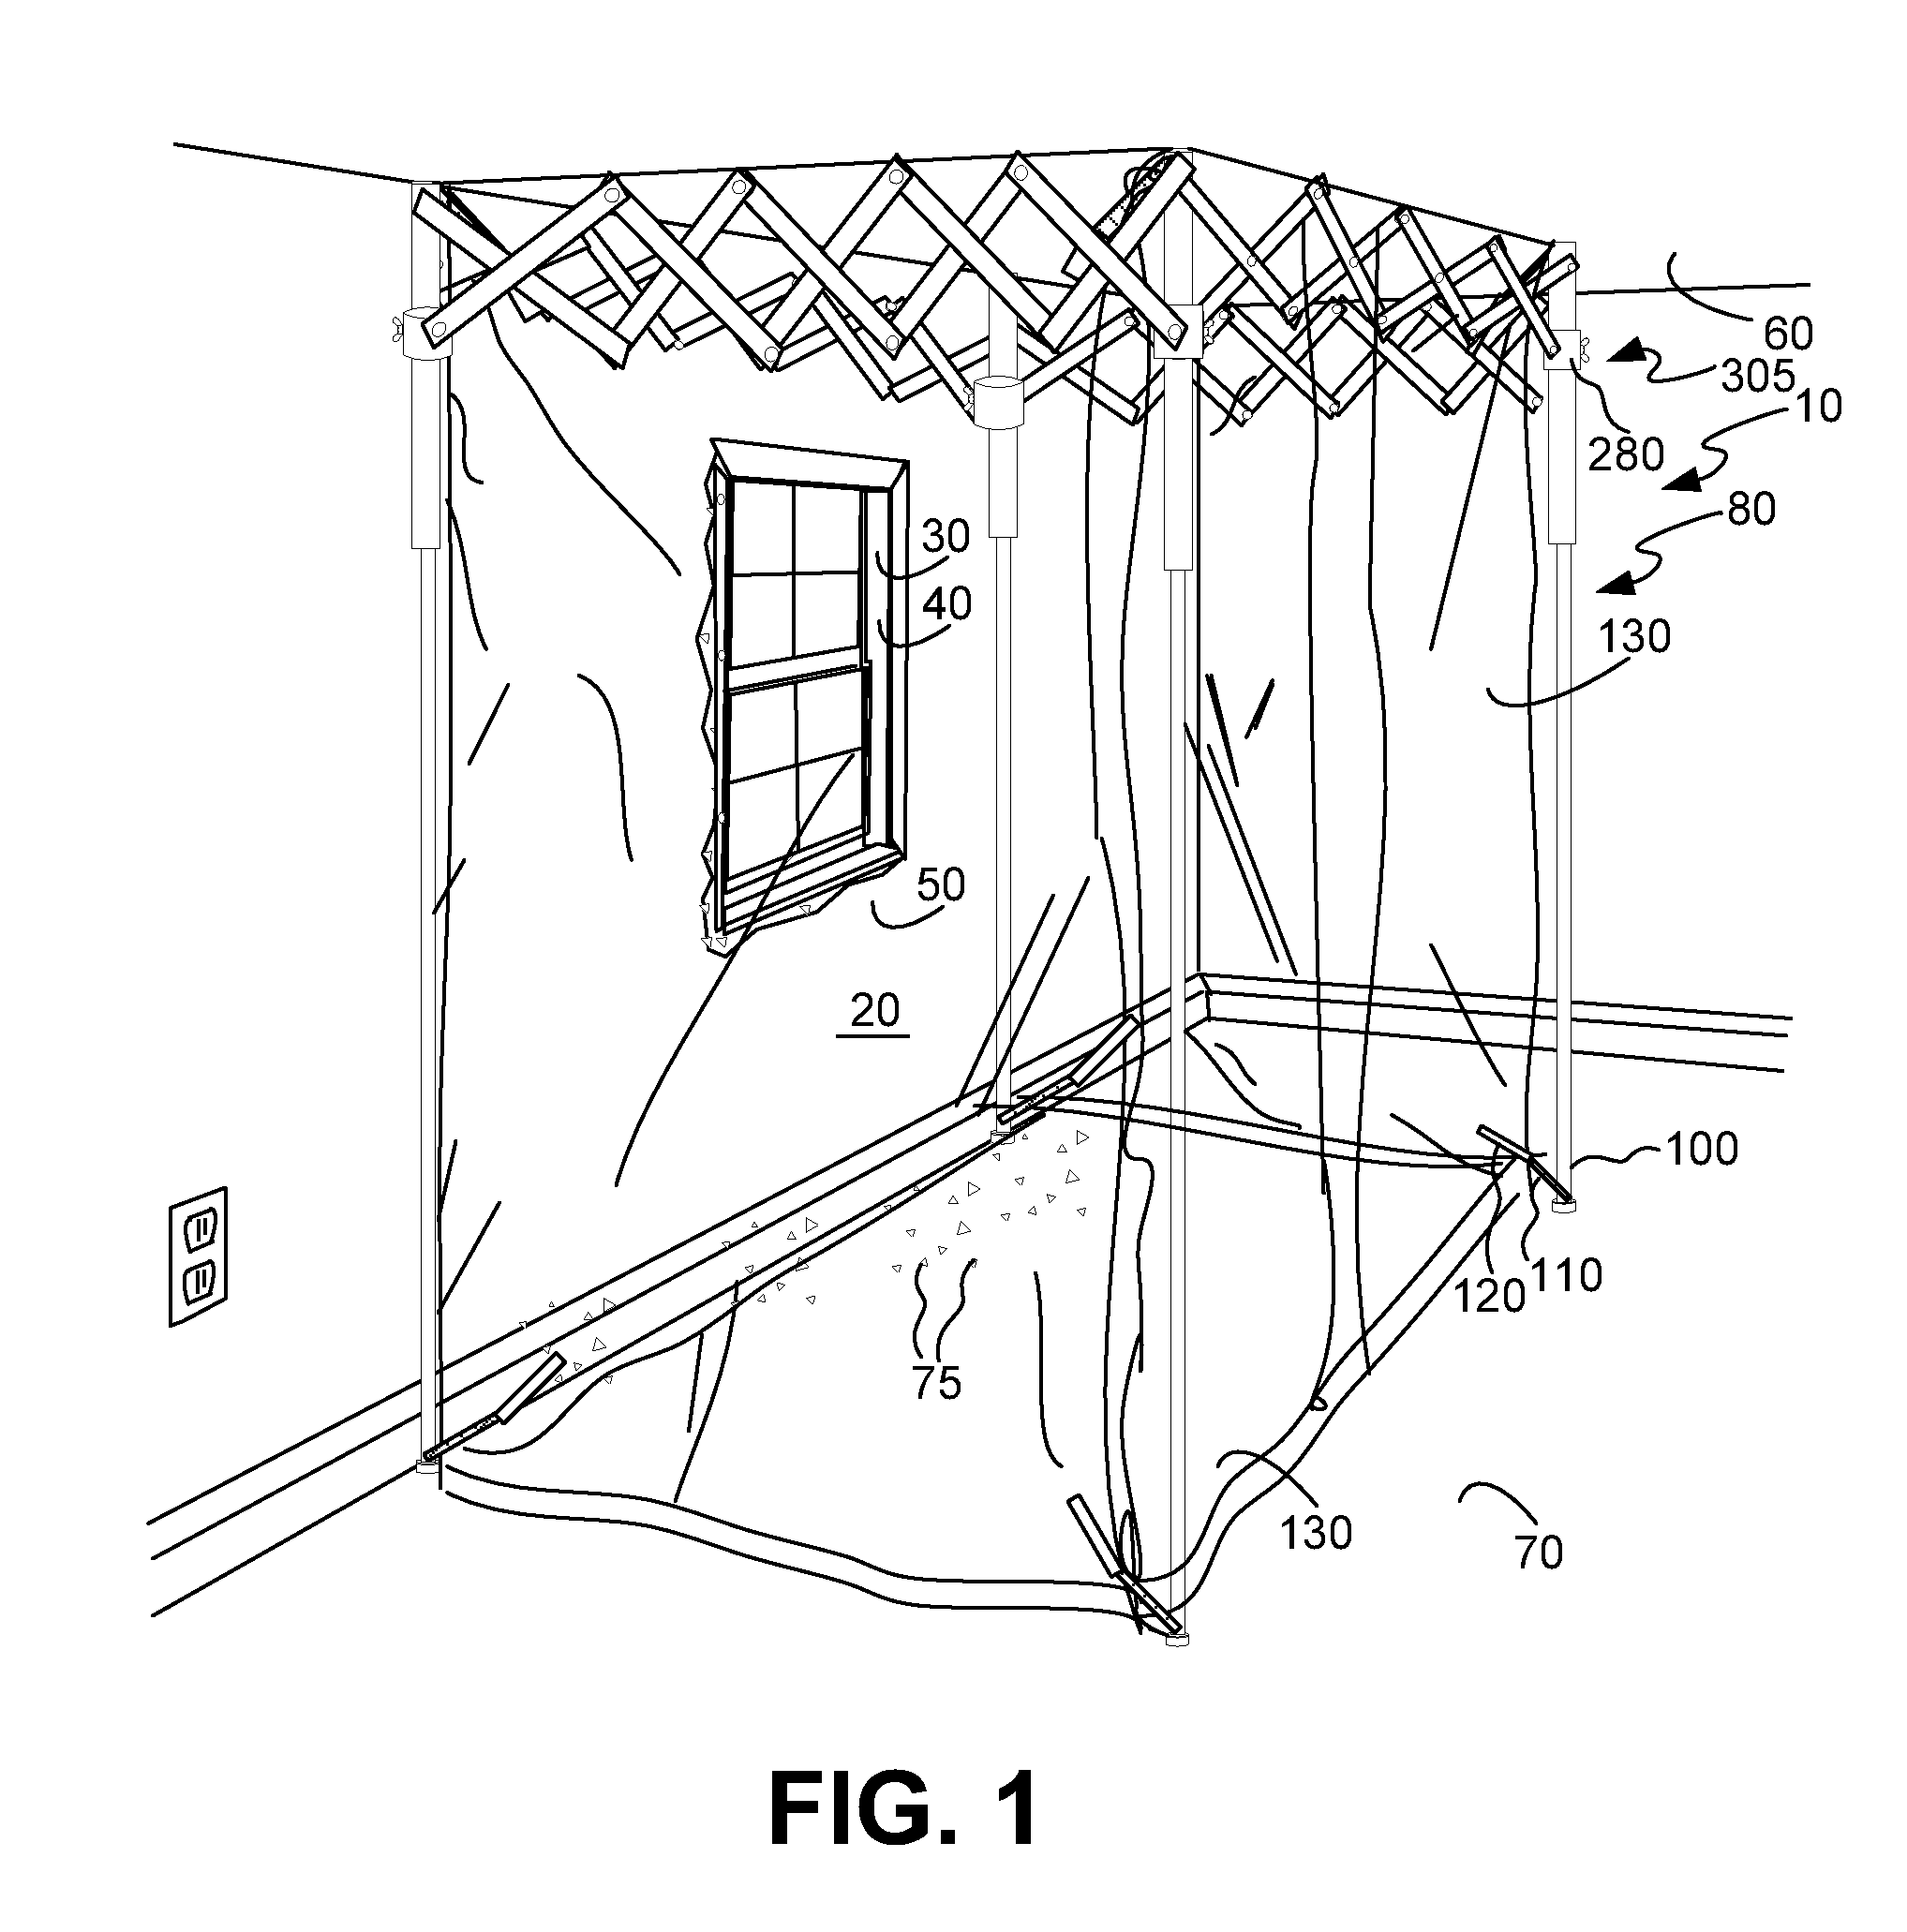 Adjustable enclosure and method for enclosing a work space having a surface therein to be worked upon, the surface bearing a lead-based paint